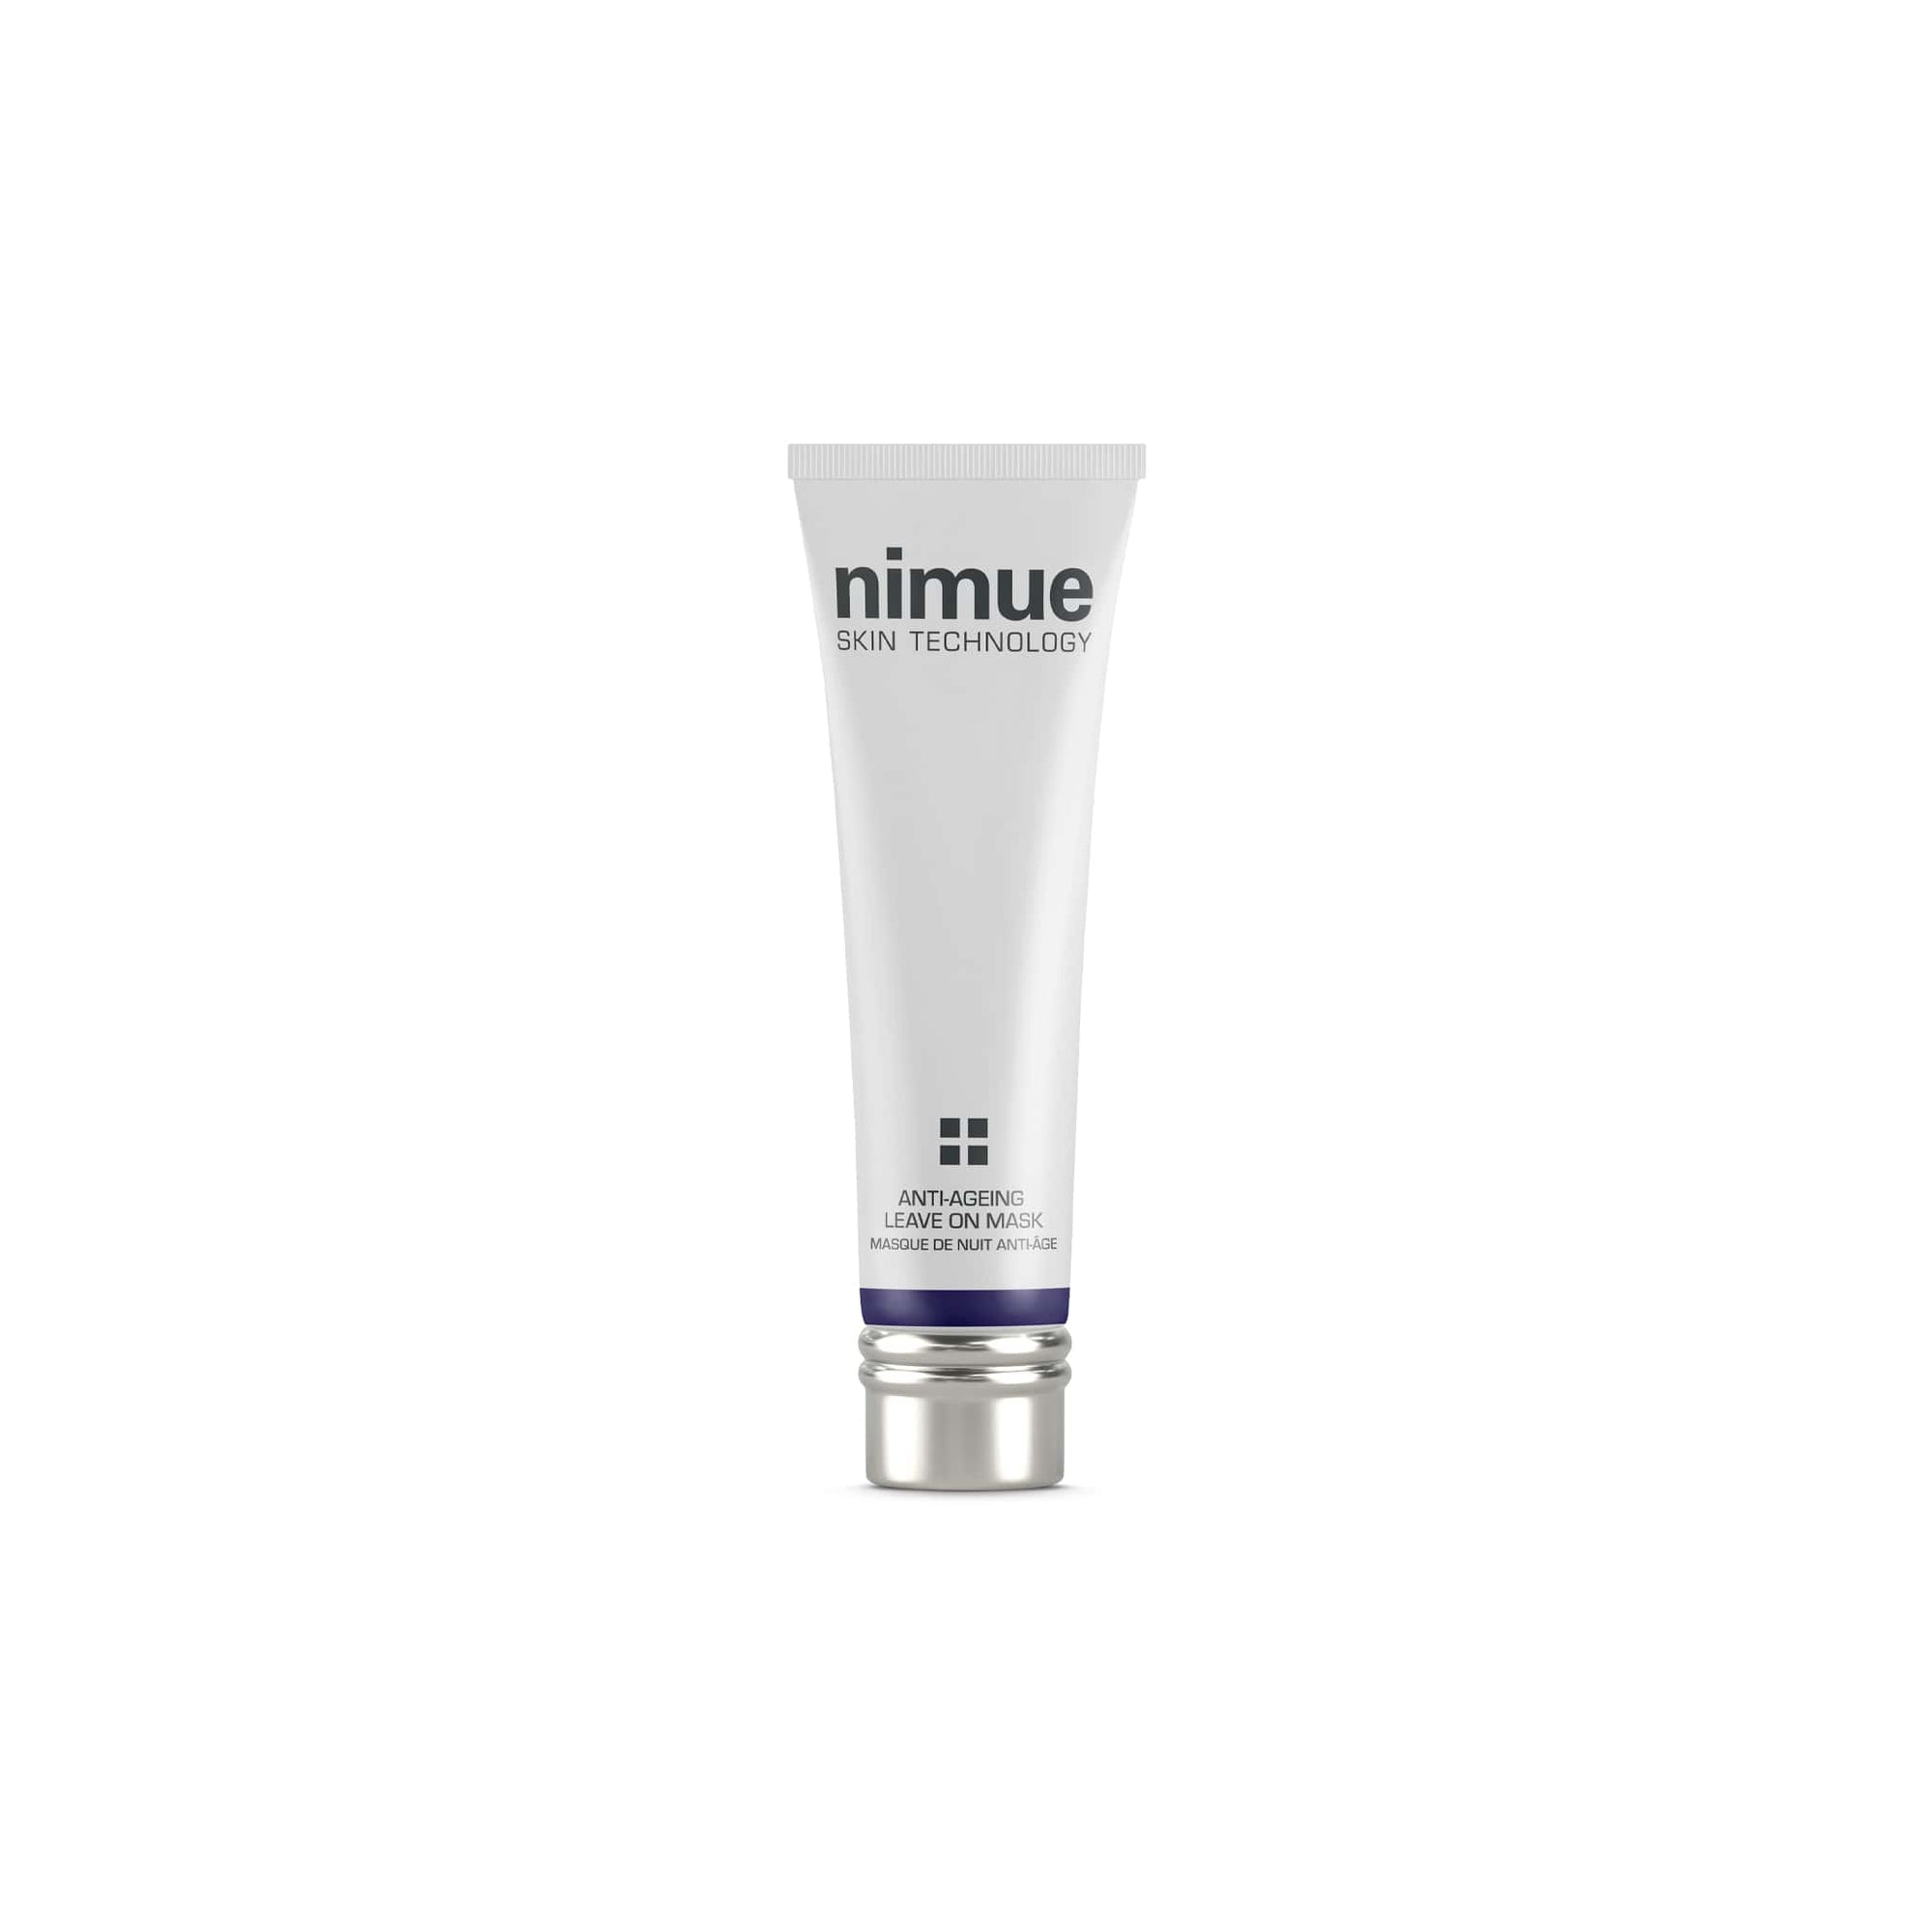 Nimue Anti-Ageing Leave On Mask 60ml